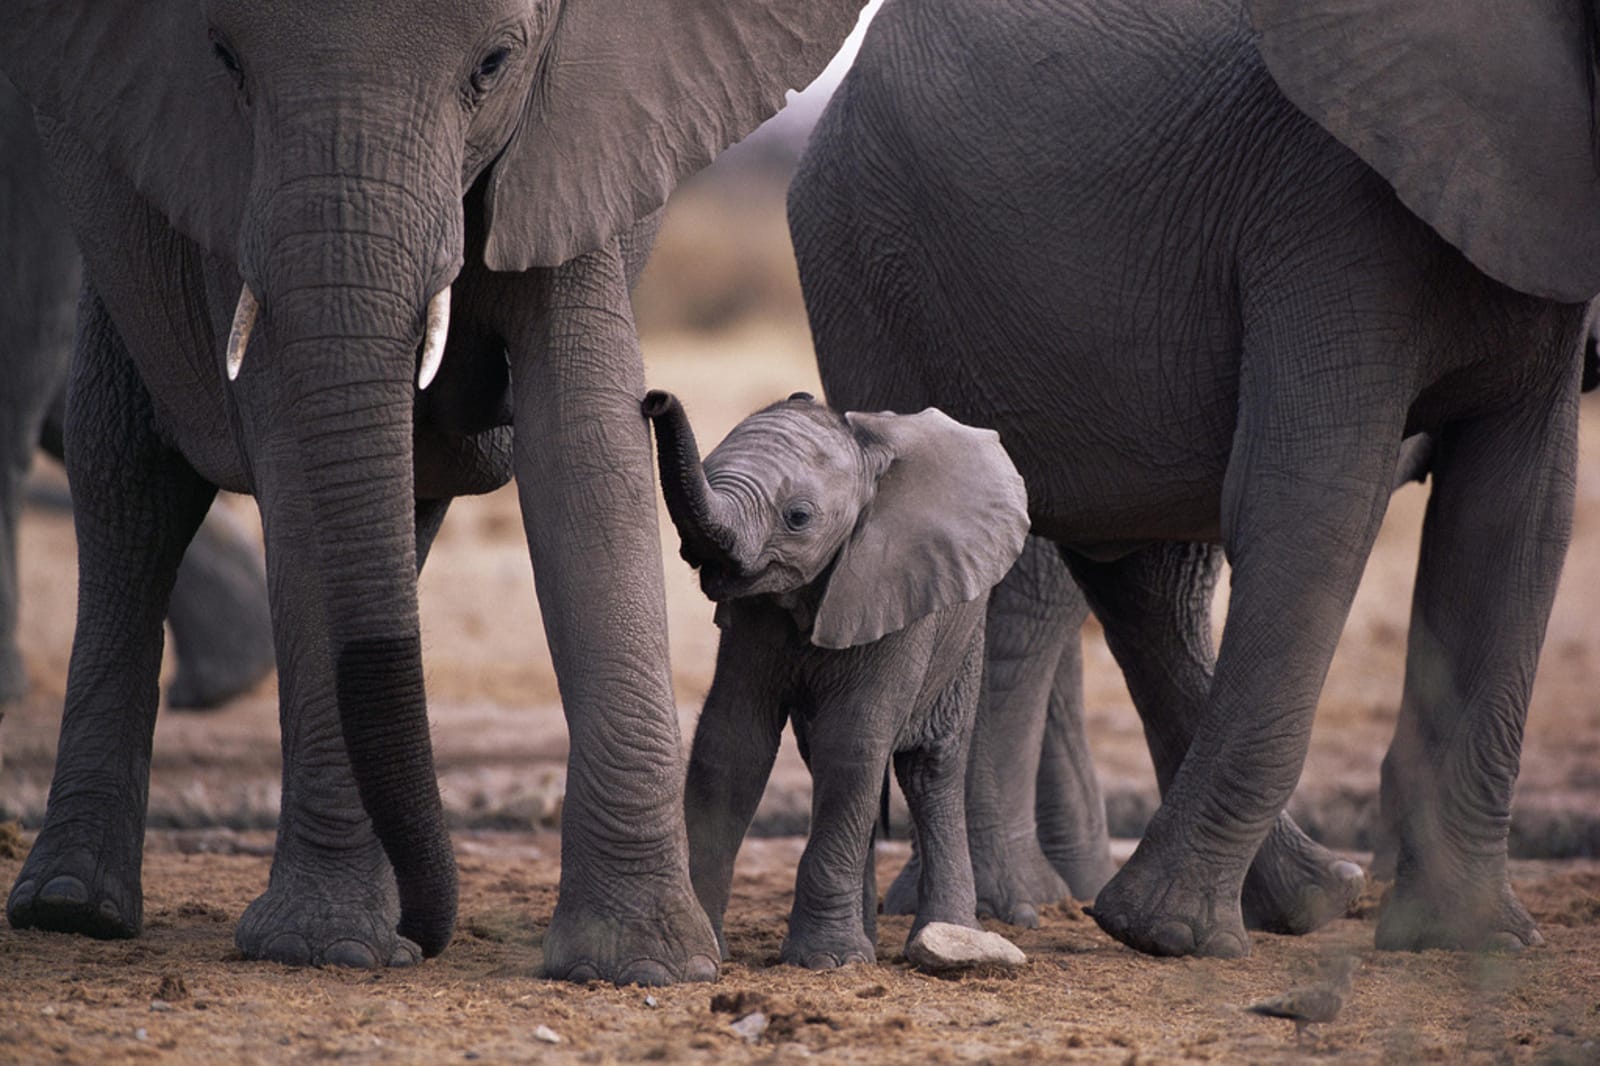 Most recently, President Barack Obama joined the ranks of the world leaders taking action for elephants by making the announcement that he would propose a ban on ivory in the United States.